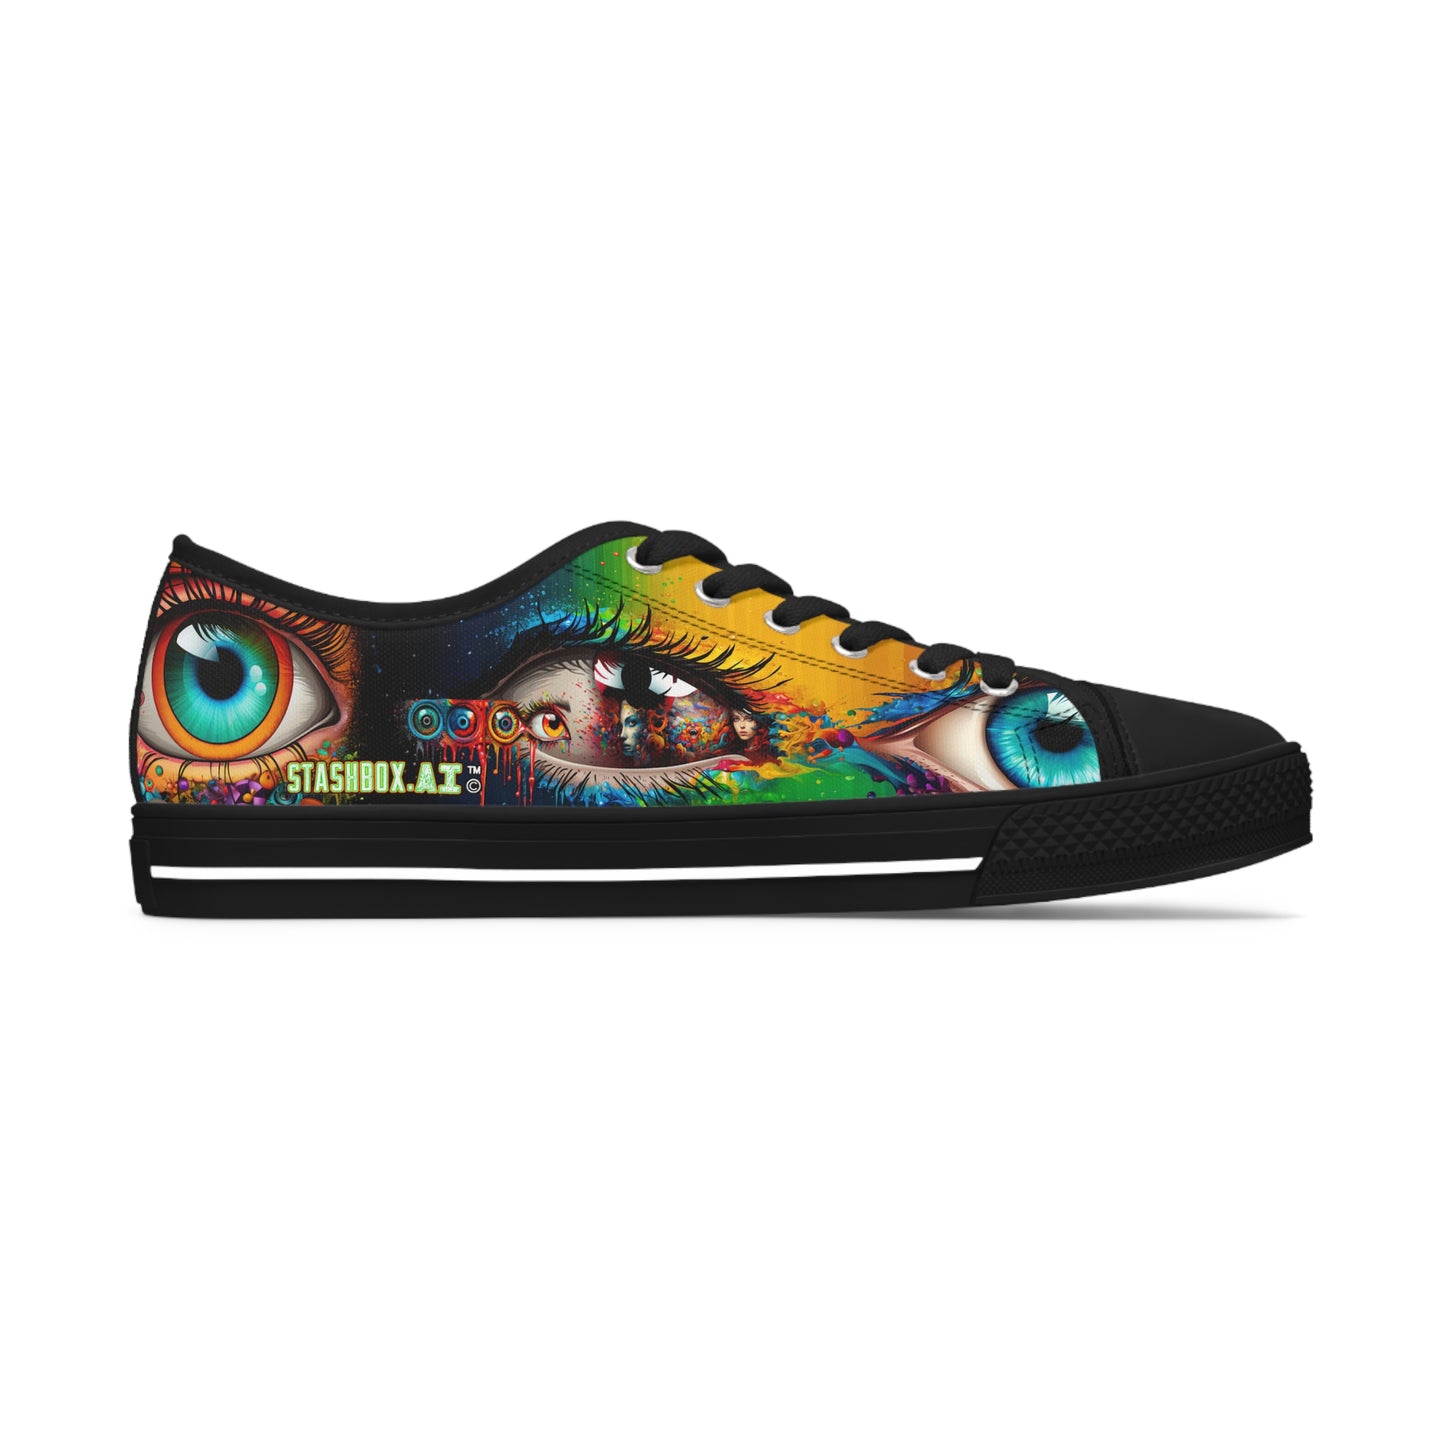 Stashbox Psychedelic Women's Shoes - Vibrant Eyes Design - #FashionStatement #BoldColors #ArtisticSneakers